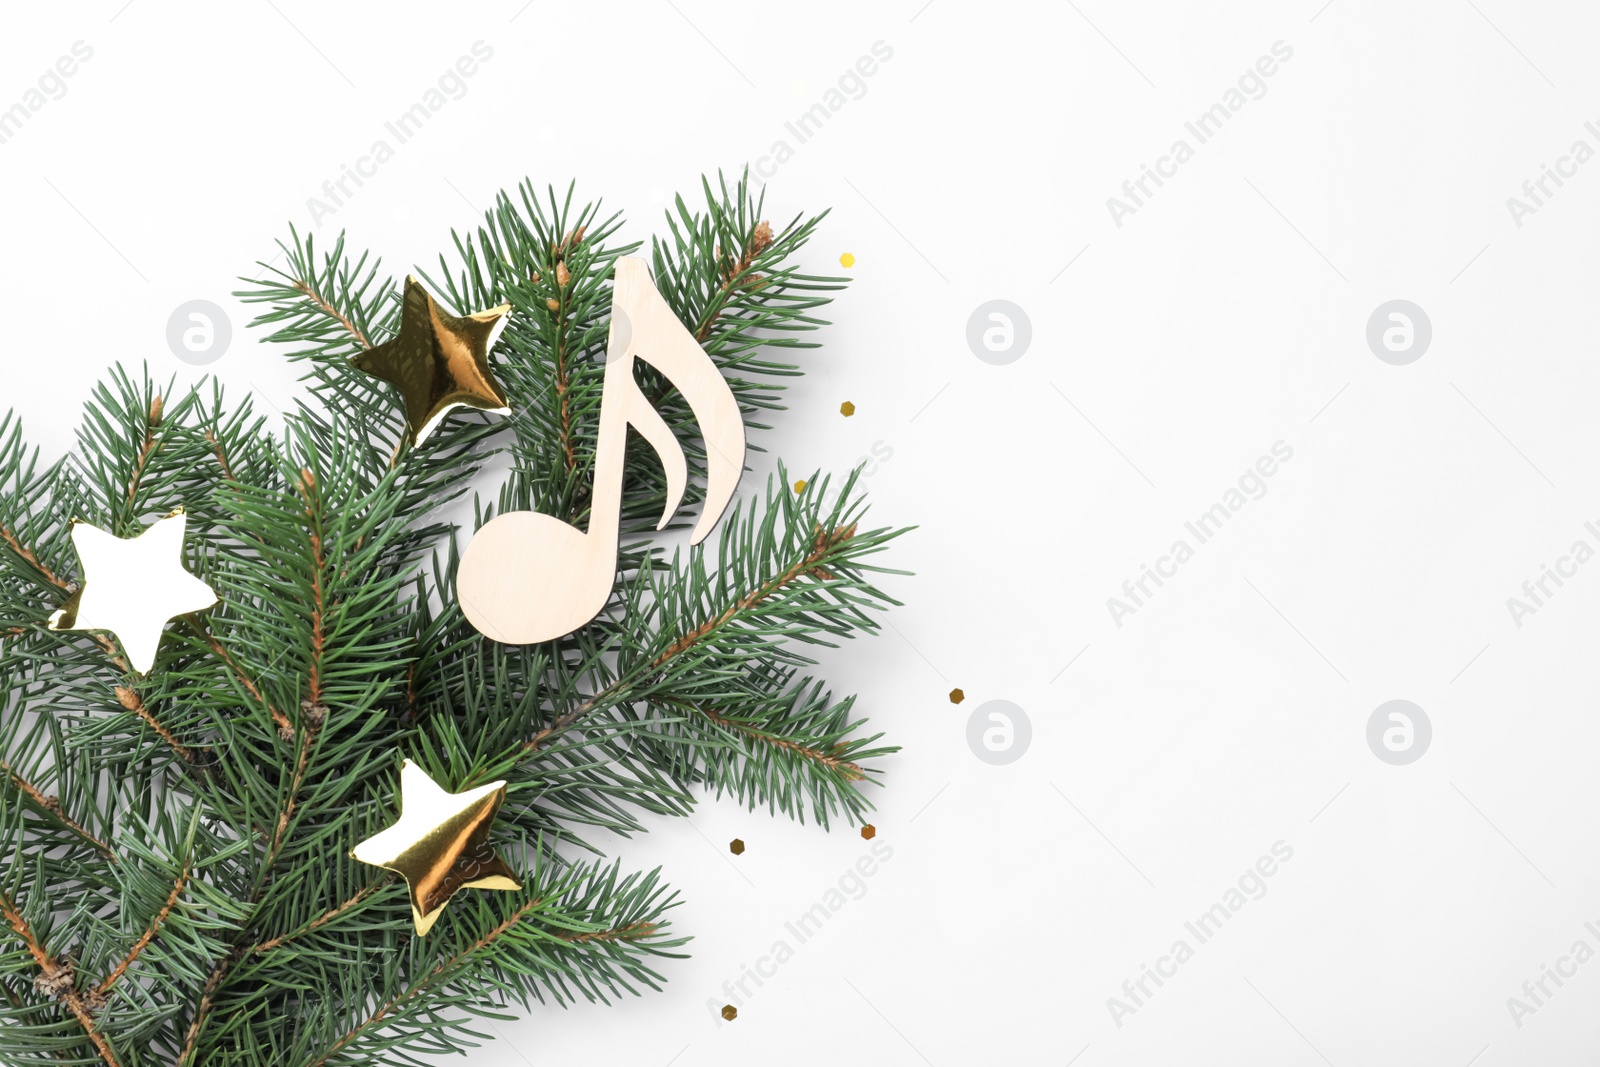 Photo of Fir tree branch with decorative golden stars and wooden music note on white background, top view. Christmas celebration